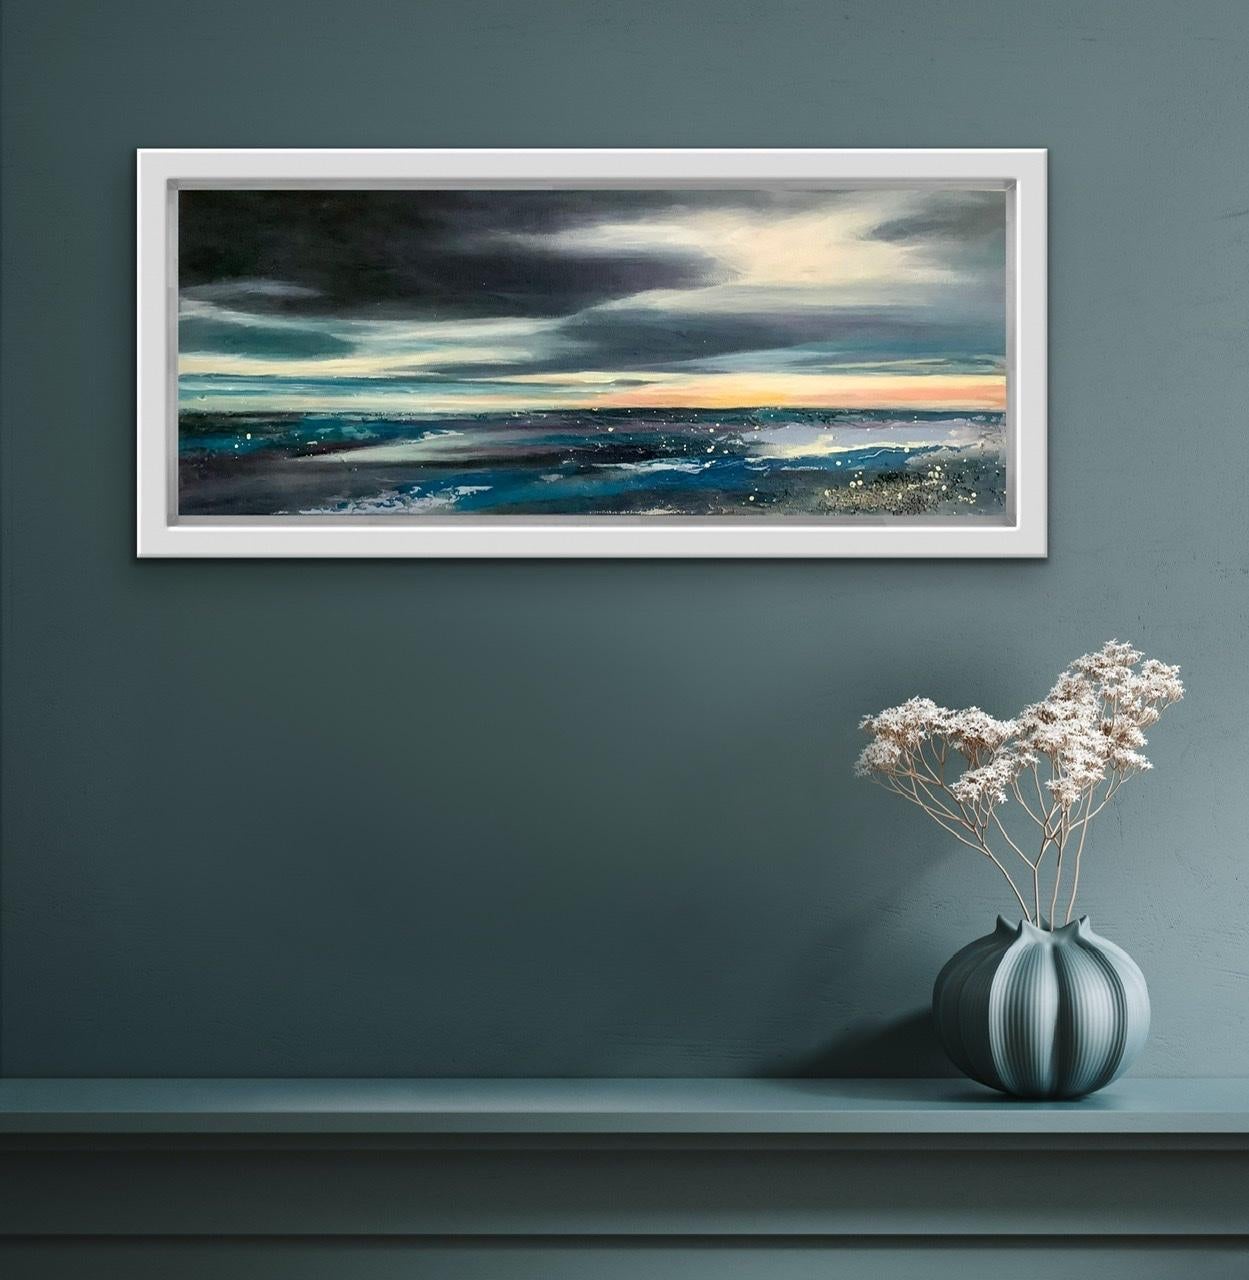 The Last Light by Adele Riley [2021]
original and hand signed by the artist 
Acrylic and acrylic inks on boxed canvas
Image size: H:20 cm x W:50 cm
Complete Size of Unframed Work: H:20 cm x W:50 cm x D:4cm
Sold Unframed
Please note that insitu